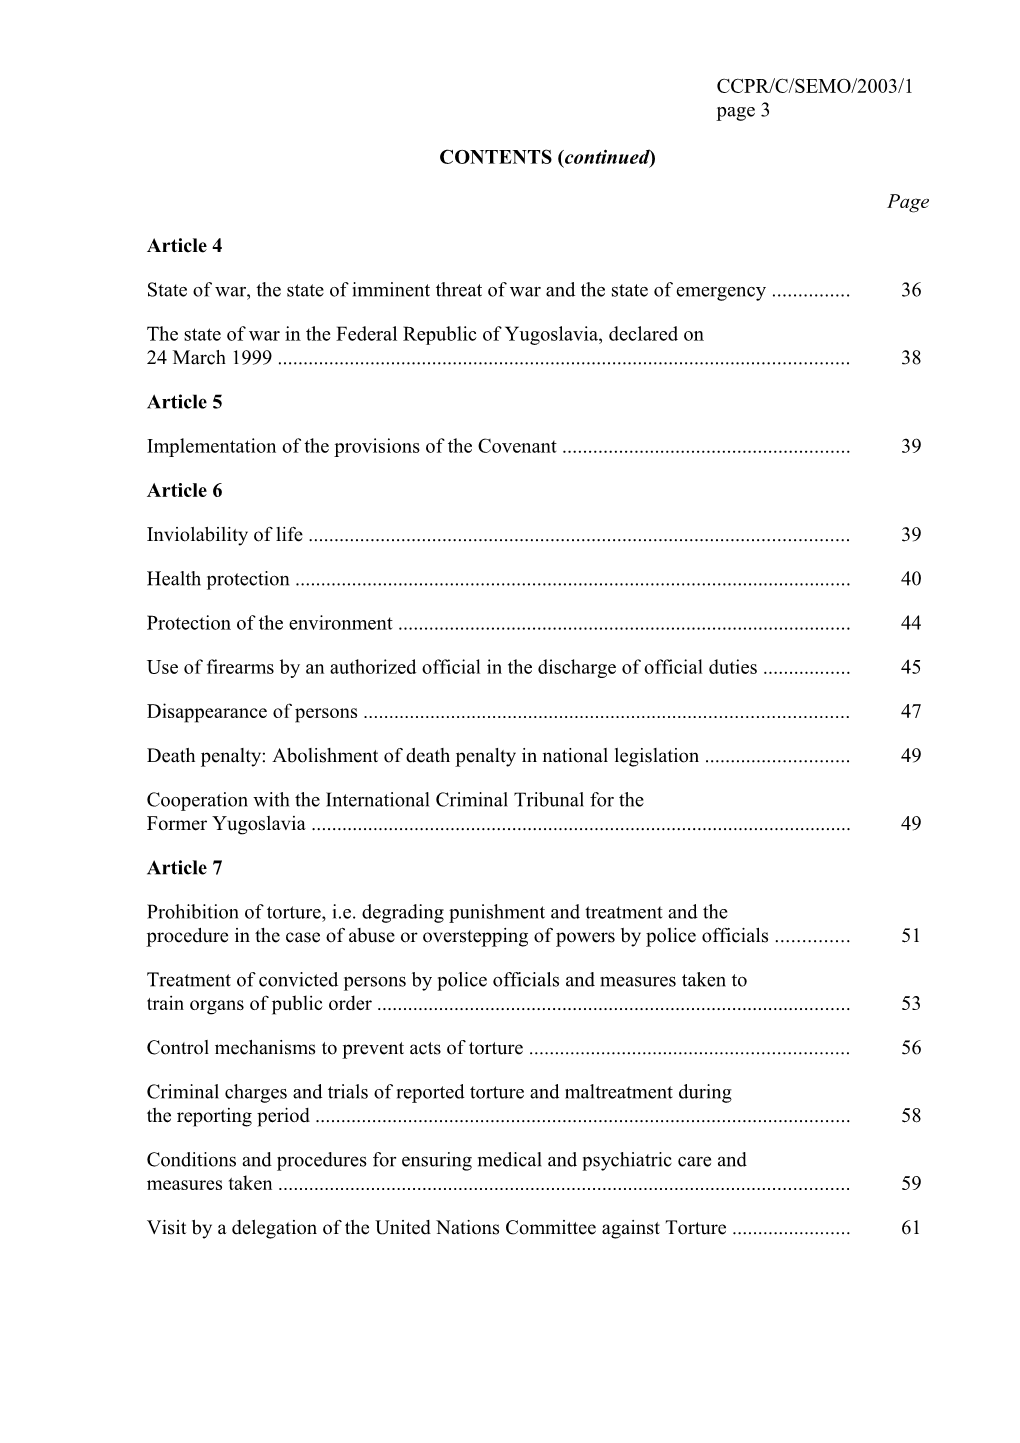 Consideration of Reports Submitted by States Parties Under Article 40 of the Covenant